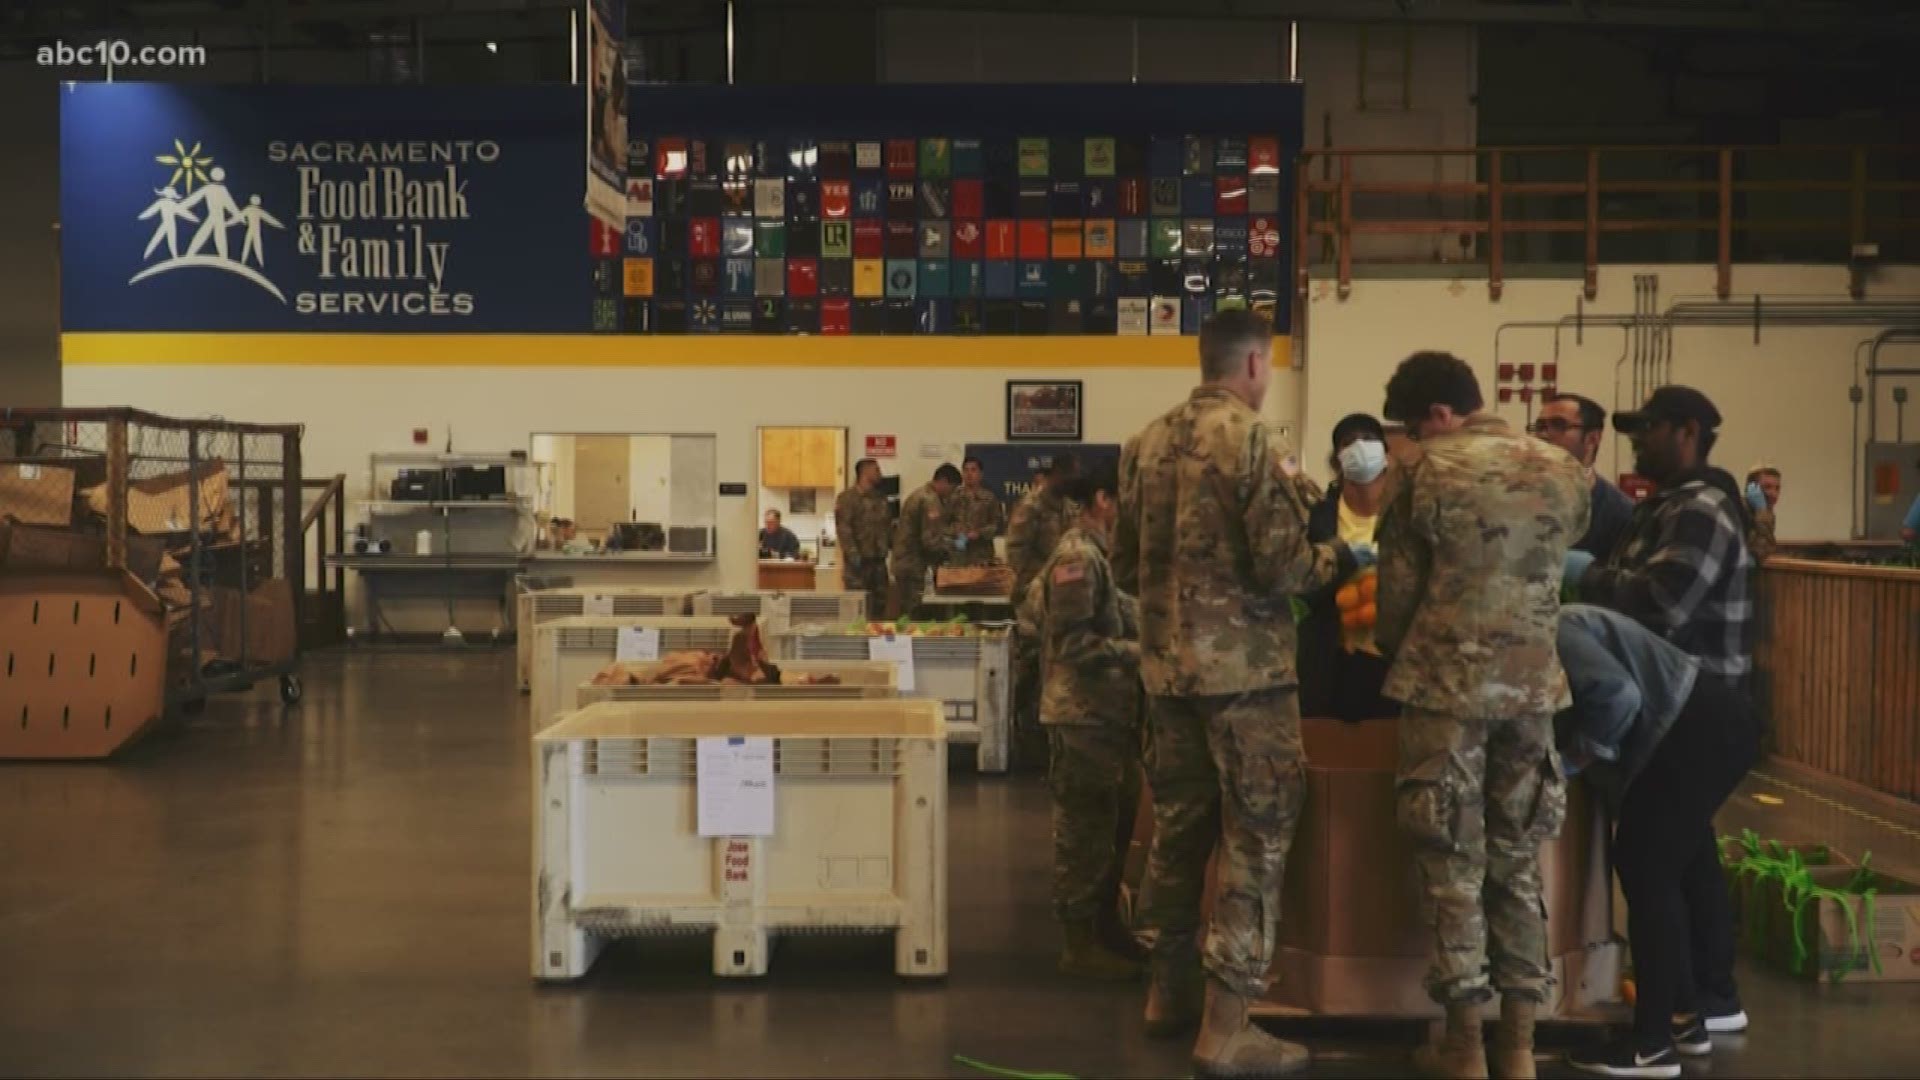 Food banks in Sacramento have seen a decline in volunteers, that is when the National Guard stepped in.